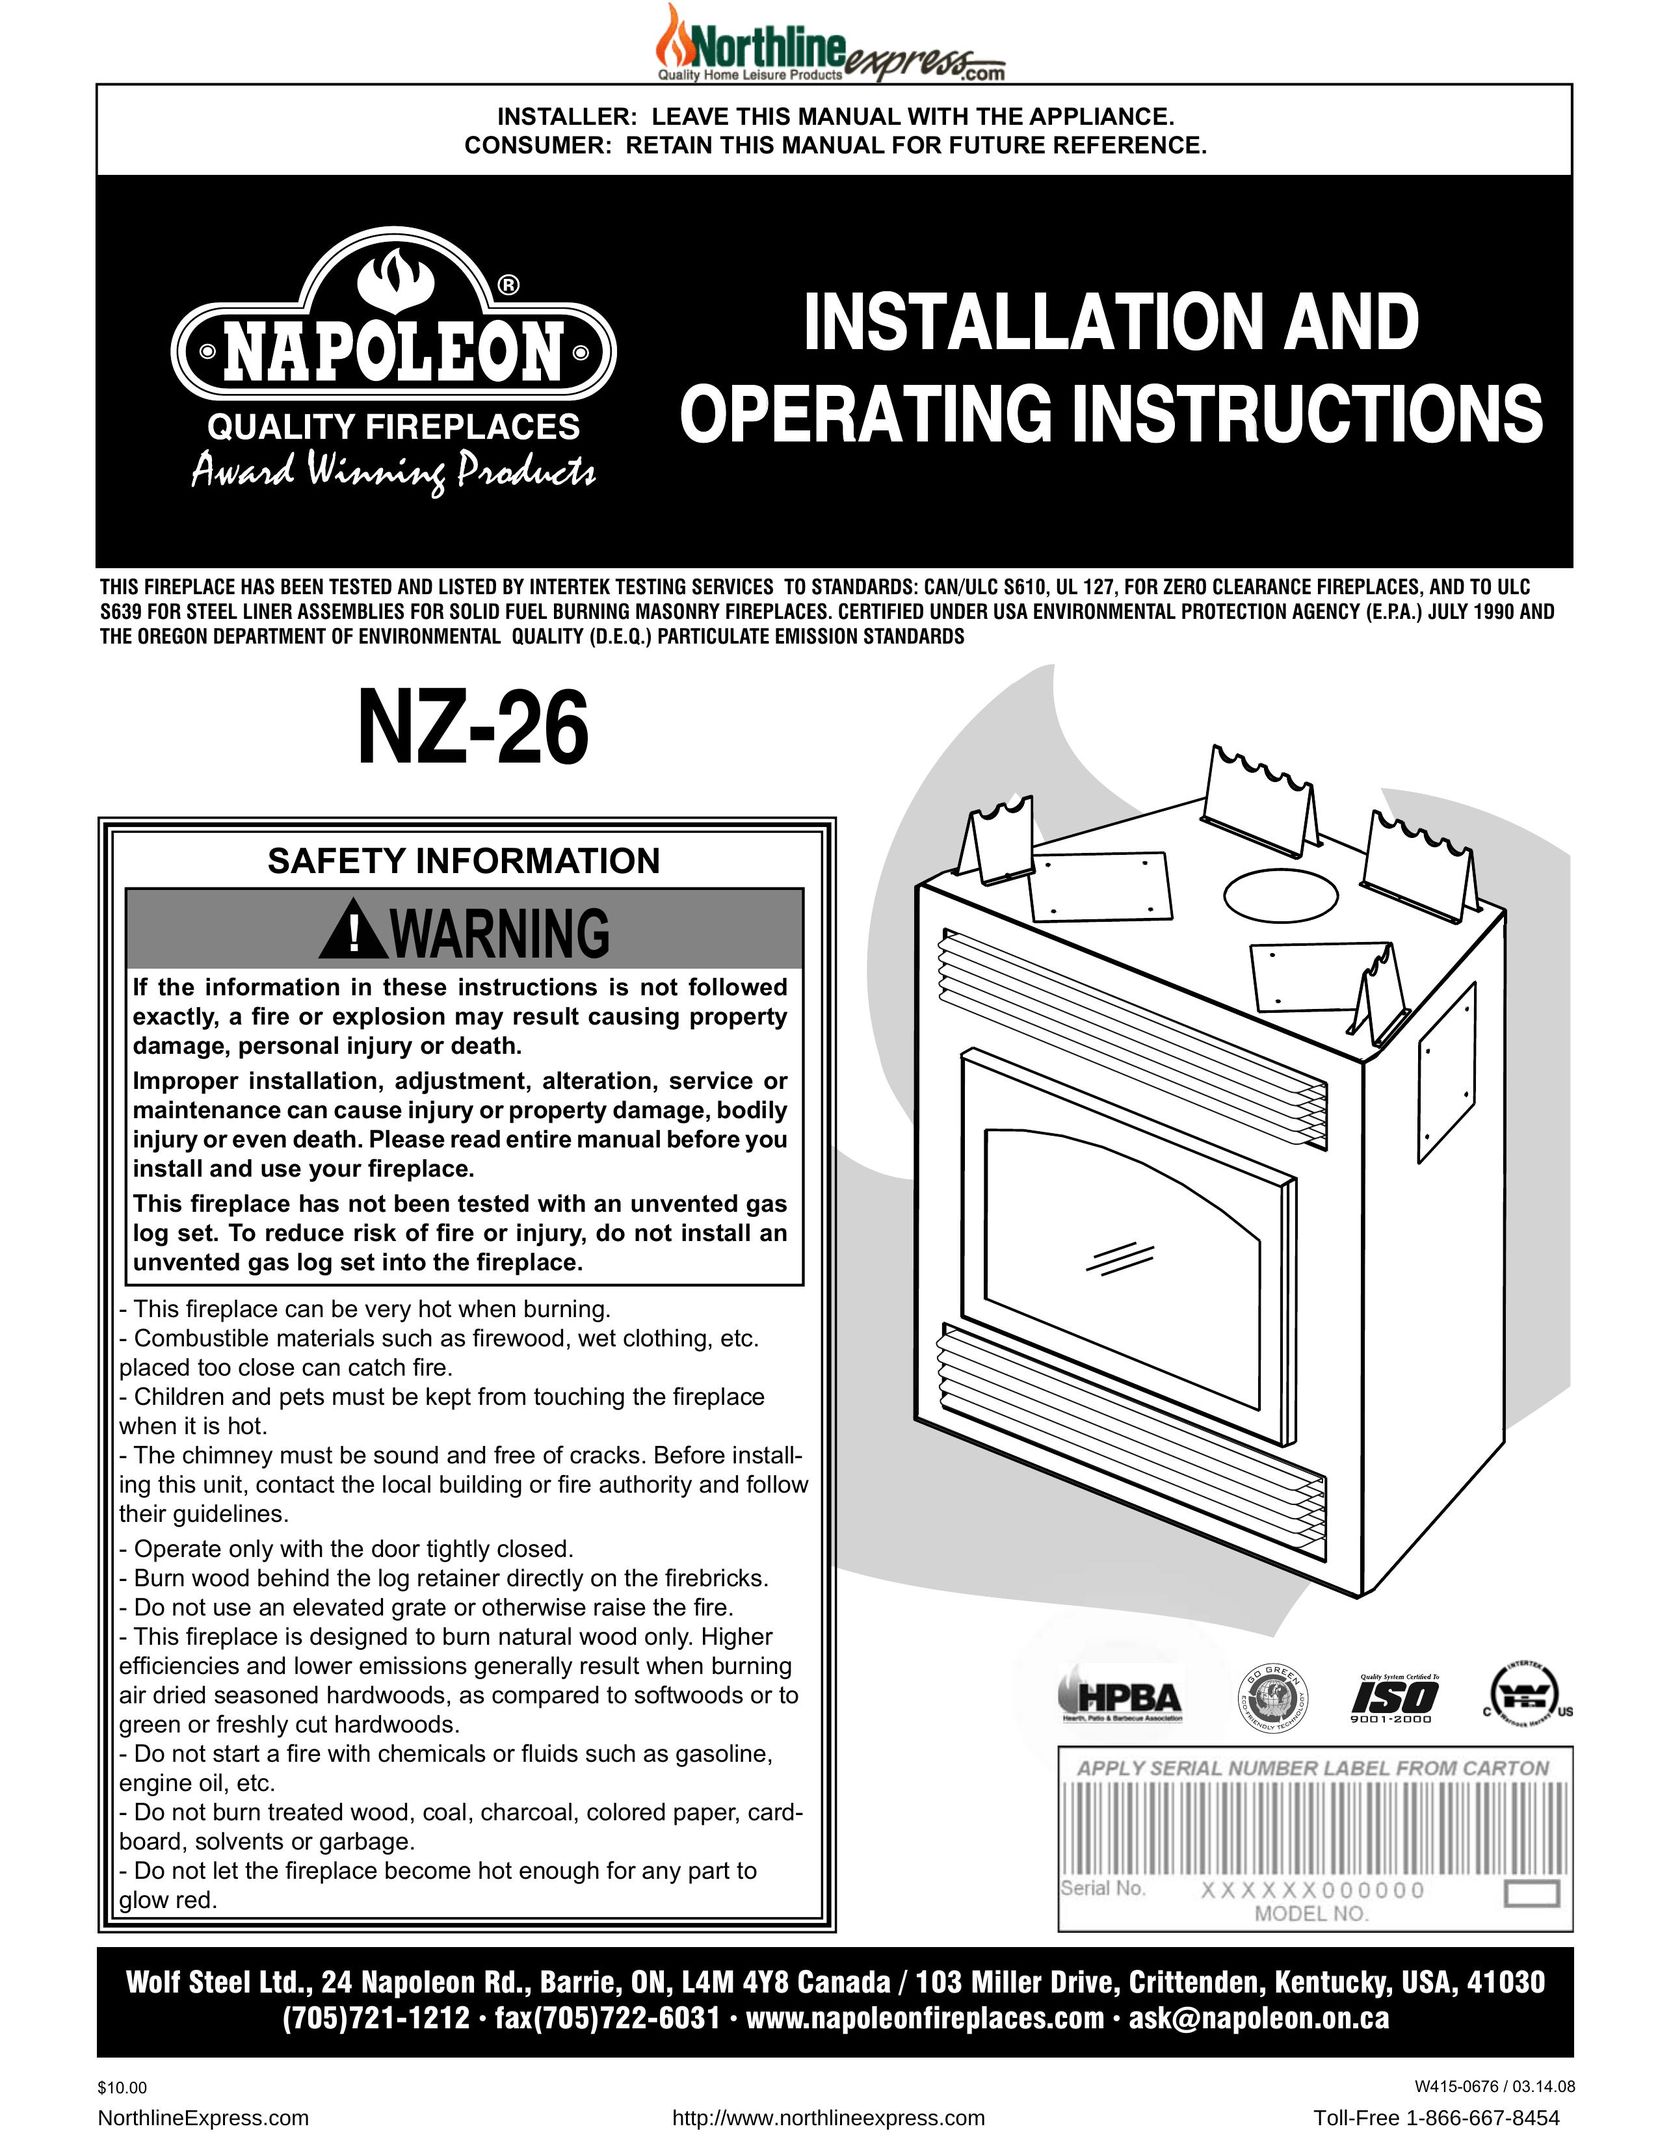 Napoleon Fireplaces NZ-26 DVD VCR Combo User Manual